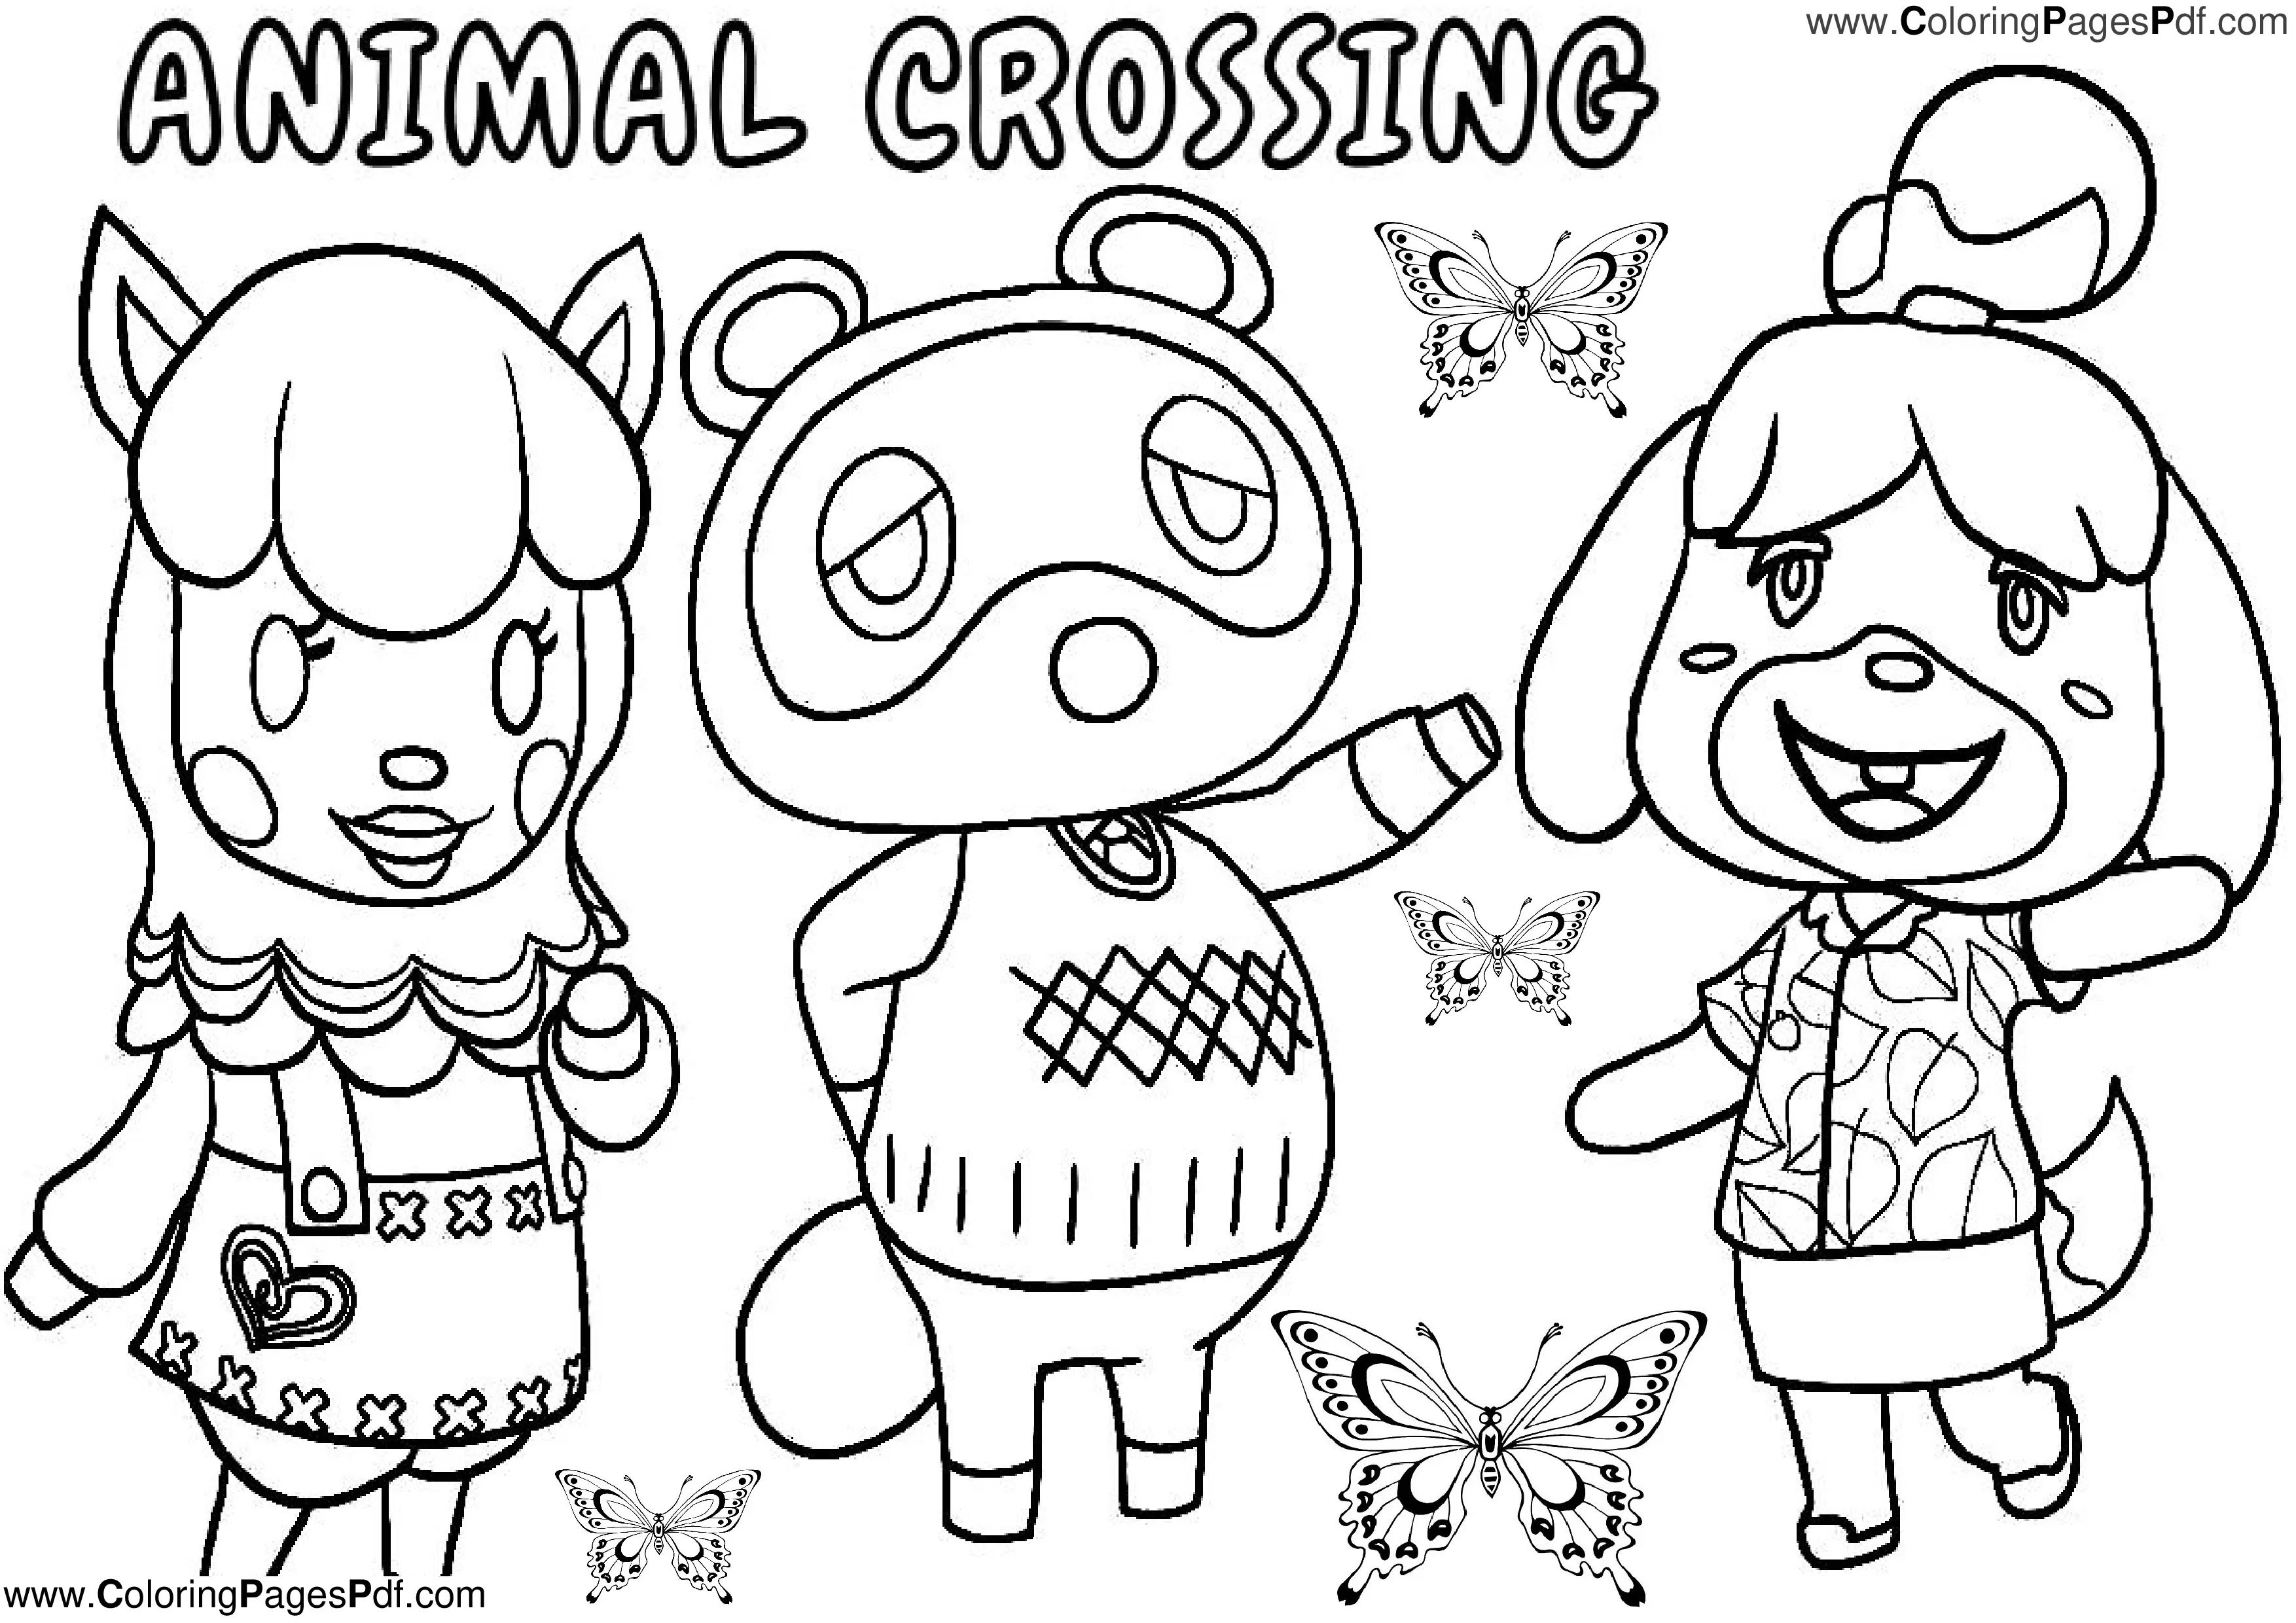 Free animal crossing coloring pages